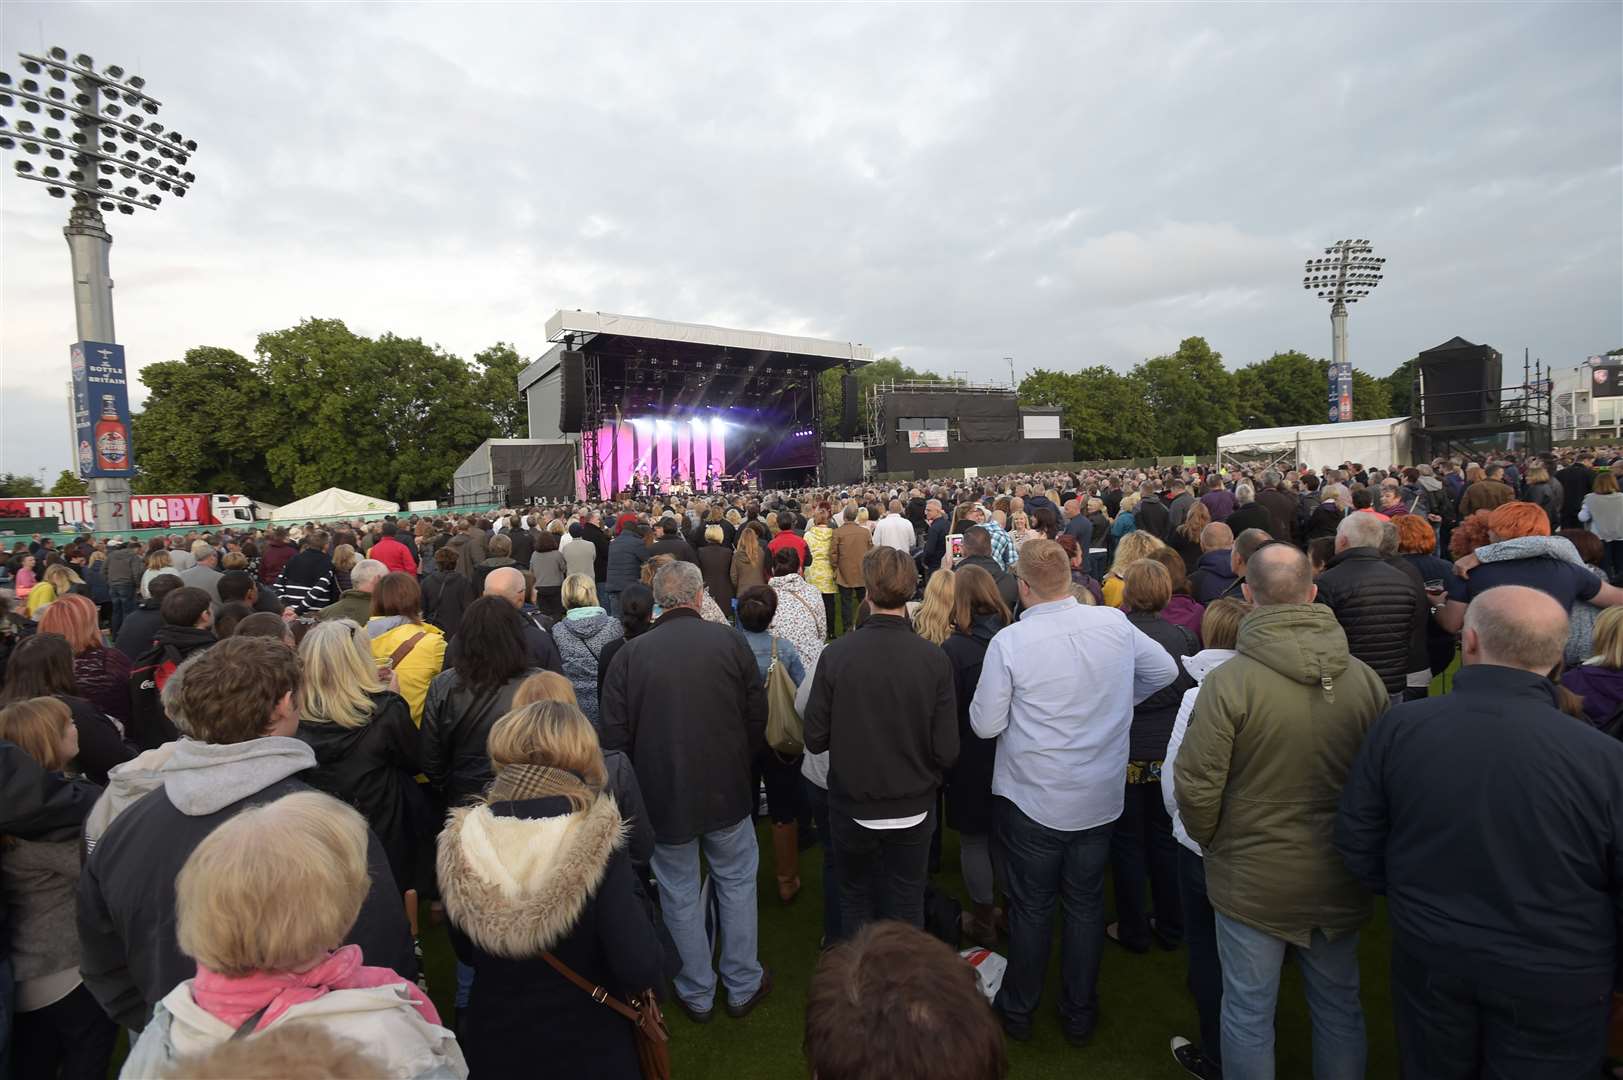 The Spitfire Ground has played host to a number of big-name concerts over the years